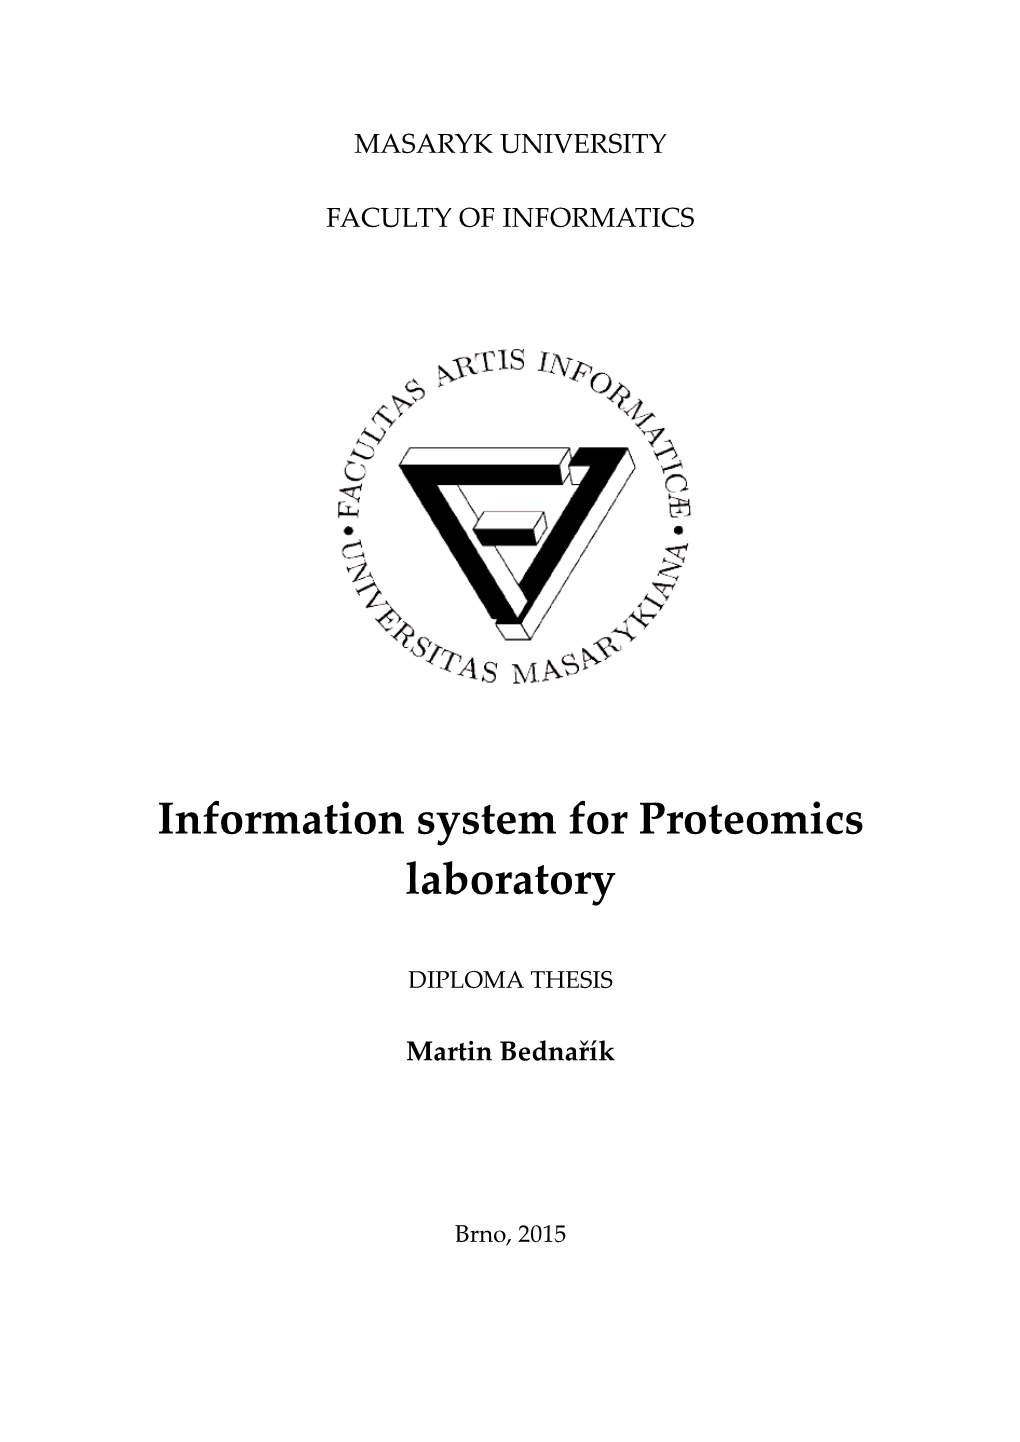 Information System for Proteomics Laboratory